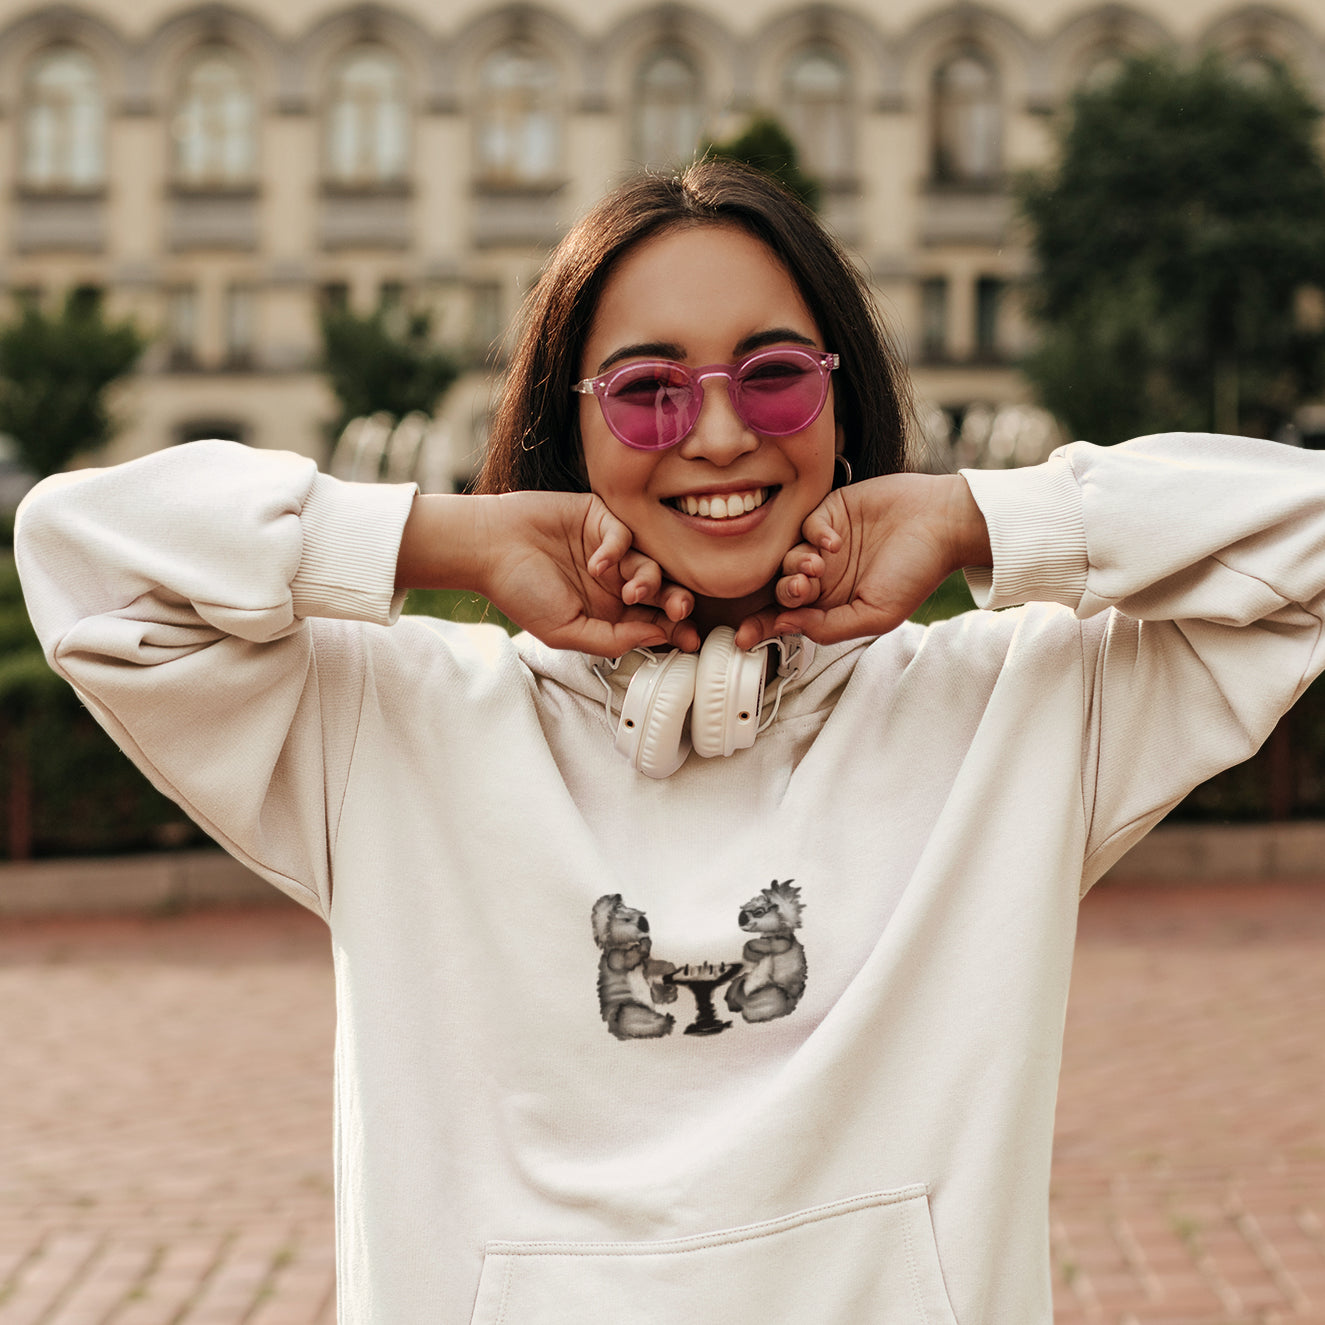 Koalas Playing Chess | Sustainable Hoodie worn by a woman